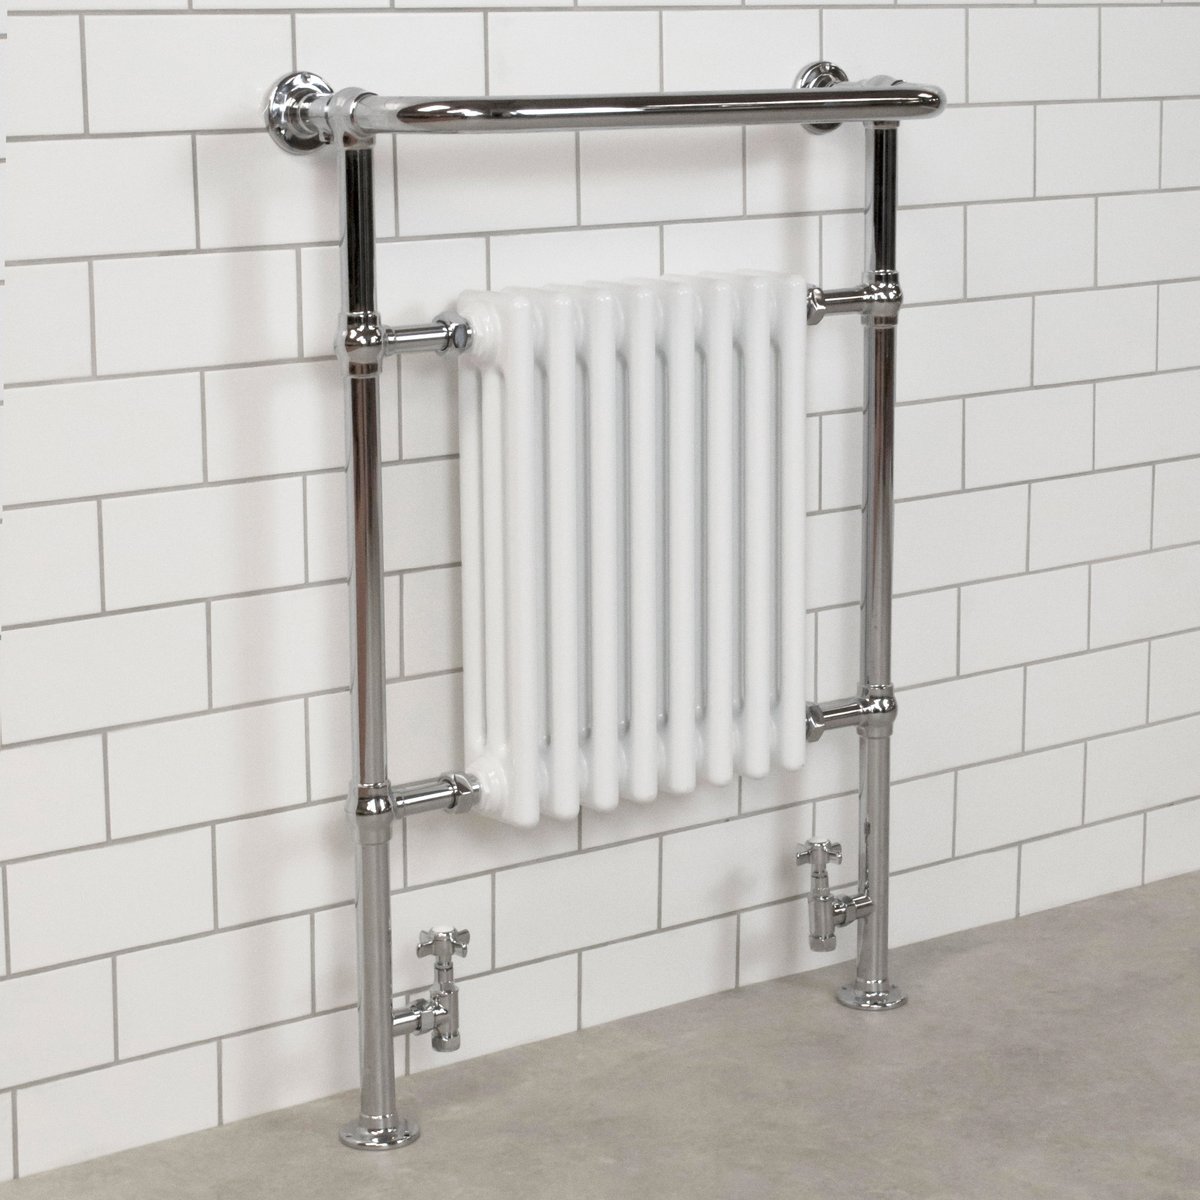 Our heating range includes a variety of column radiators and heated towel rails. This range comprises the collections, Curved, Smooth, Comby, Straight, Regency, Ballerina, Elizabeth and Mode. Check out our heating >> bit.ly/36IbjFS #bathroom #bathroomheating